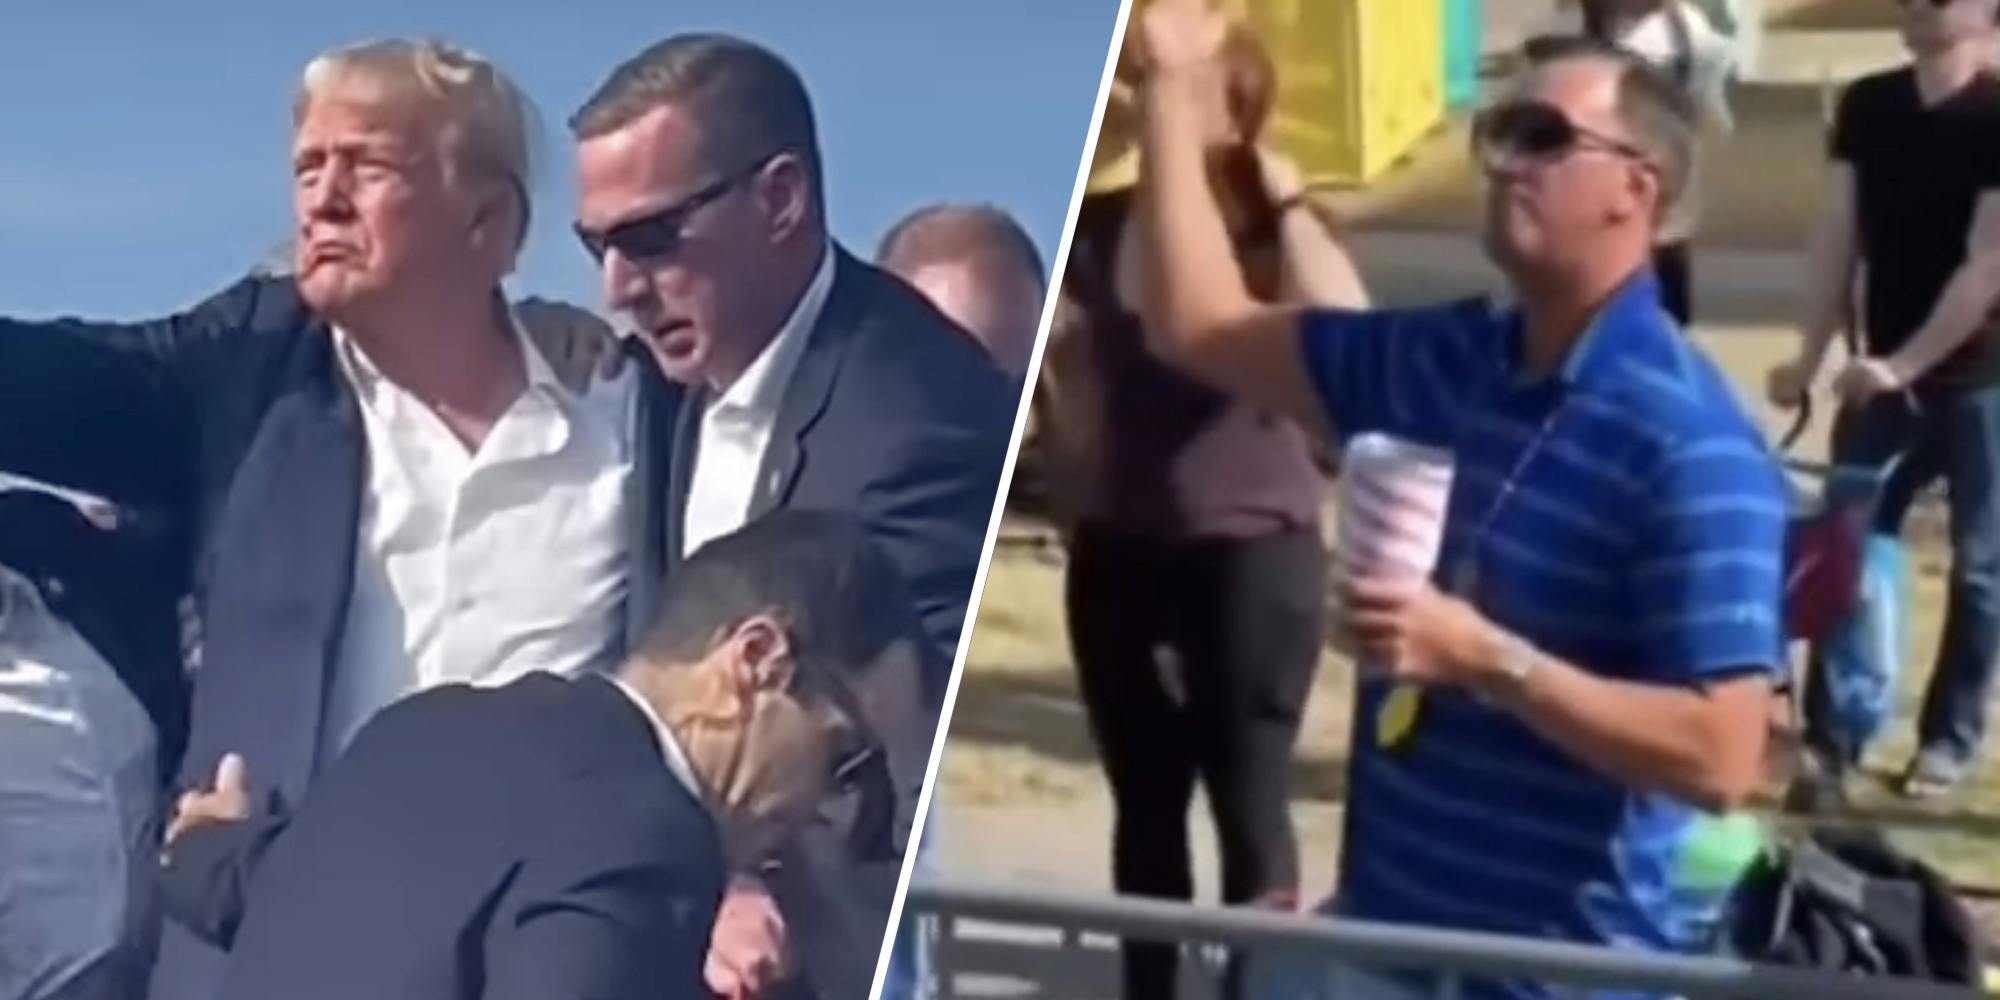 Secret Service agent on Trump’s detail during shooting bears striking resemblance to TikTok’s ‘Thinking With My D’ guy